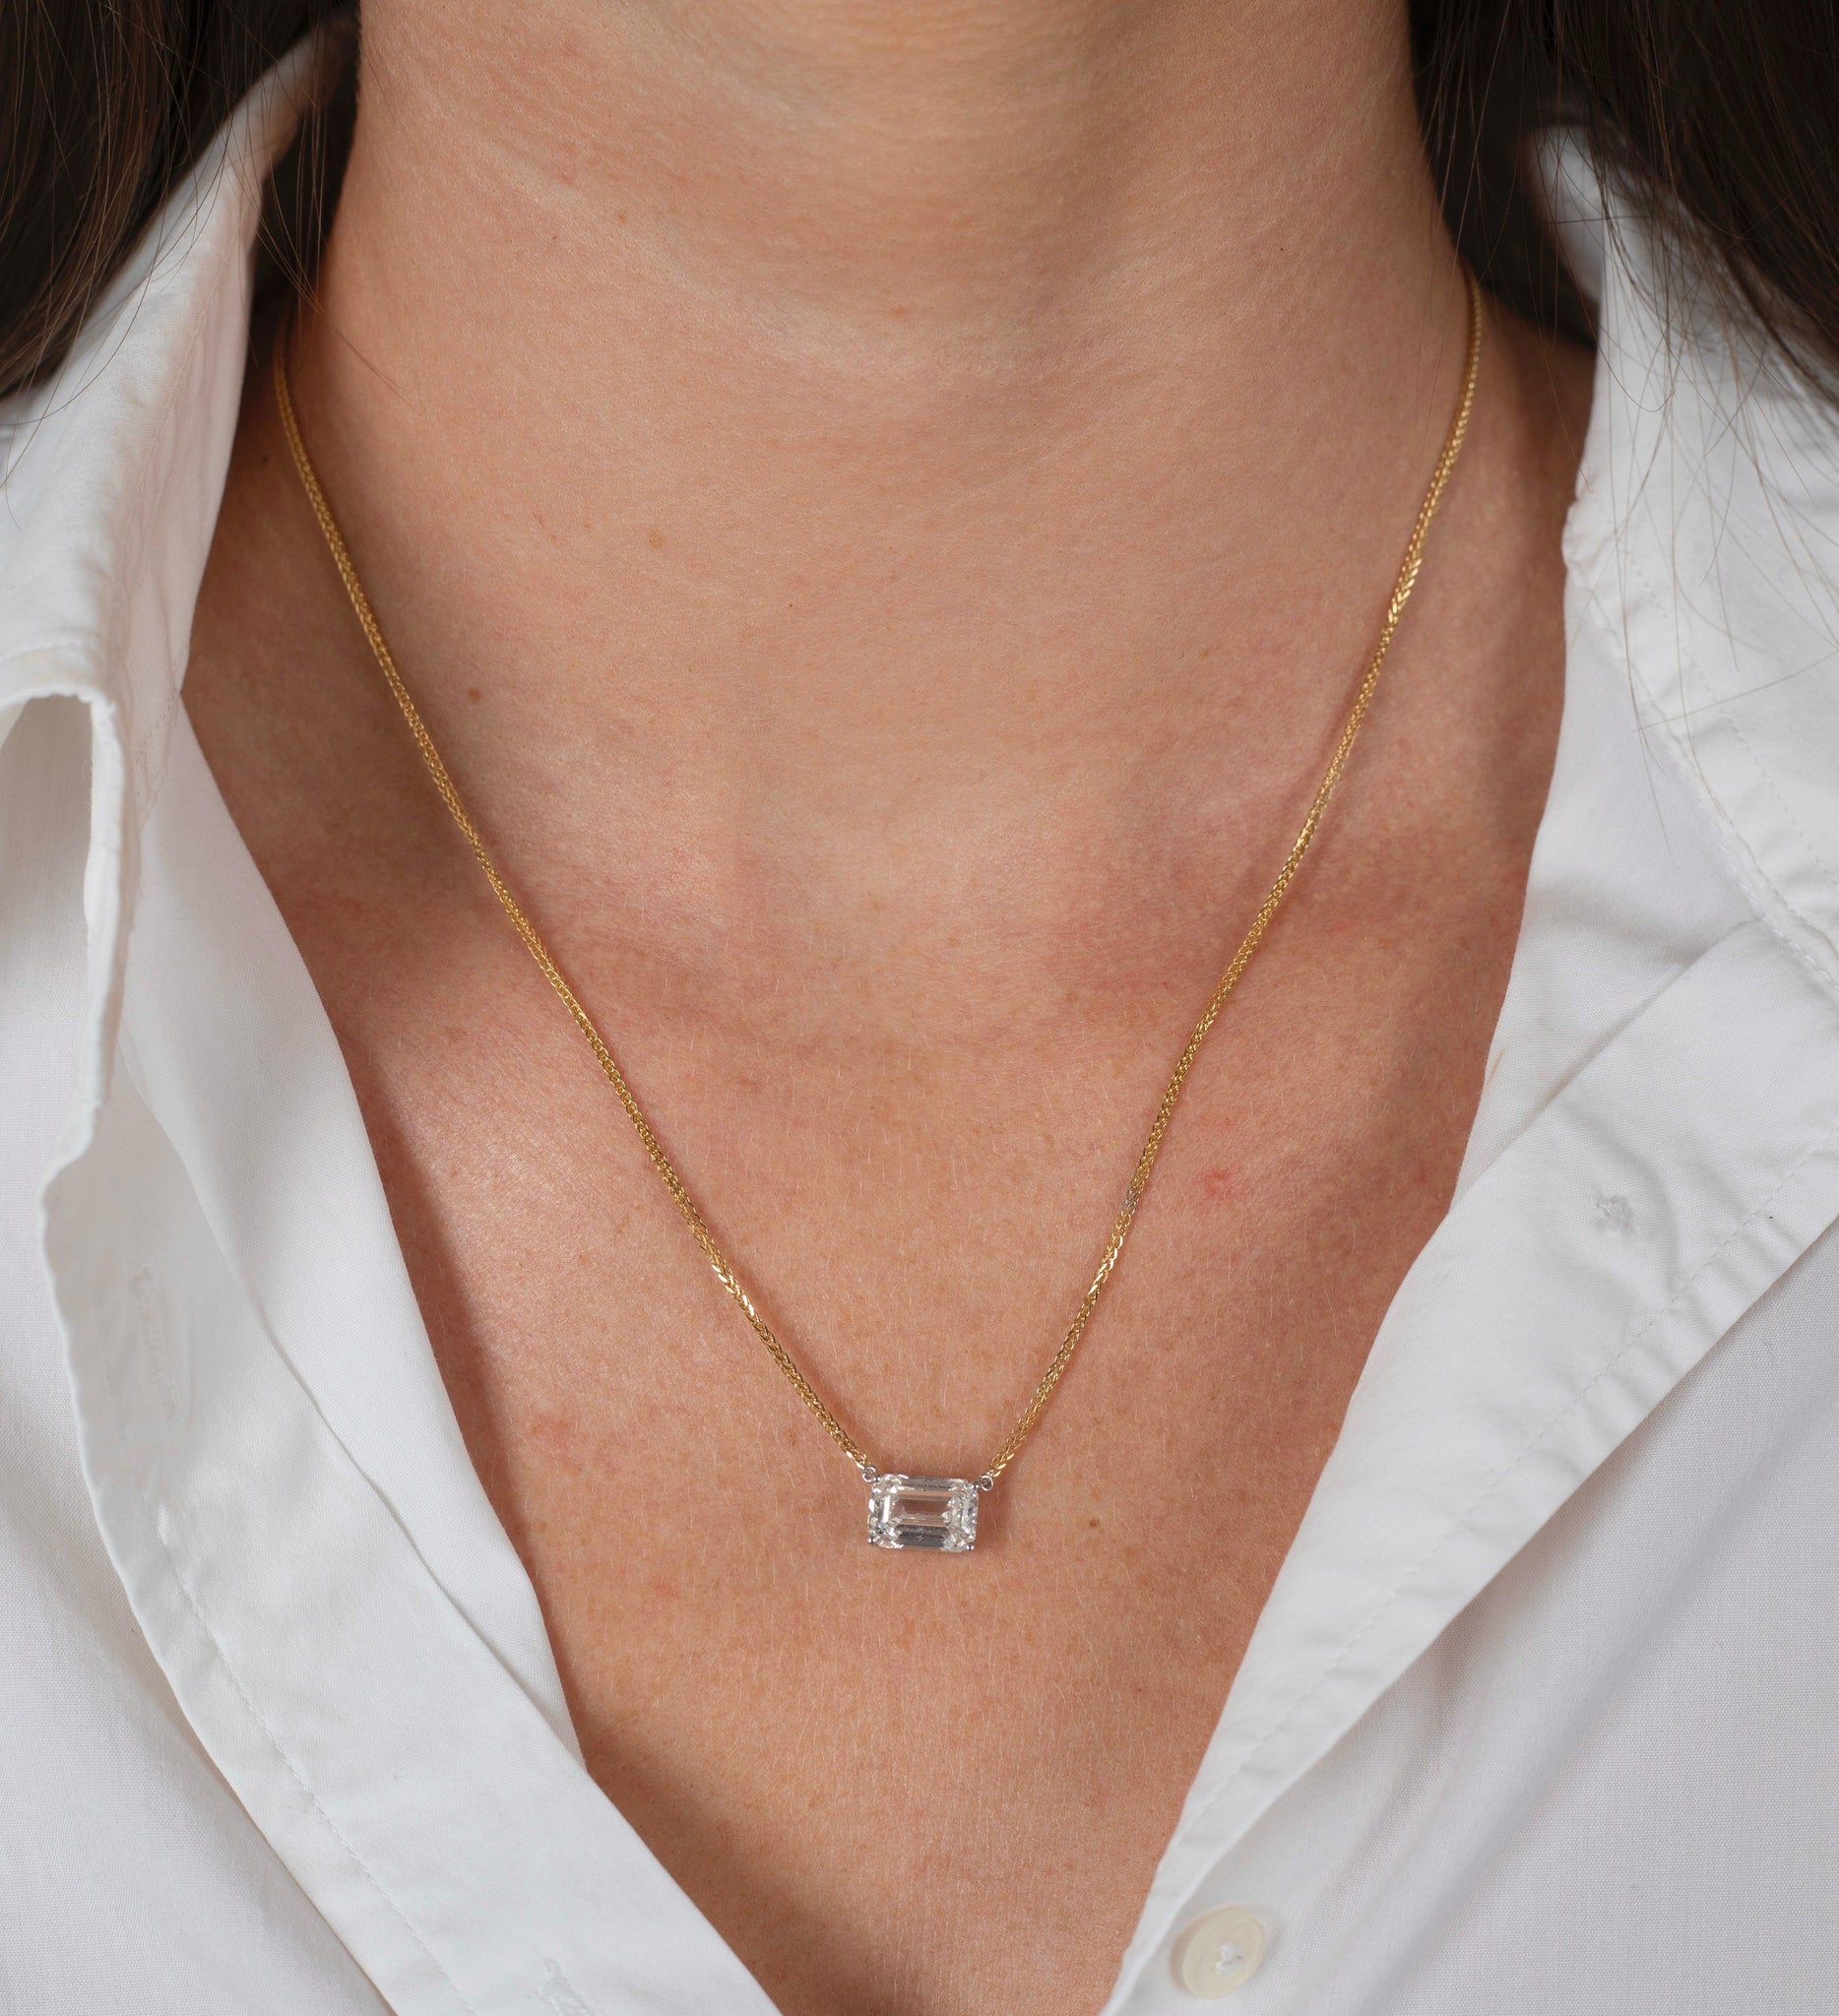 2 Carat Emerald Cut Lab Grown Diamond Connected Floating Necklace in 18K Yellow & White Gold 2-Tone Setting